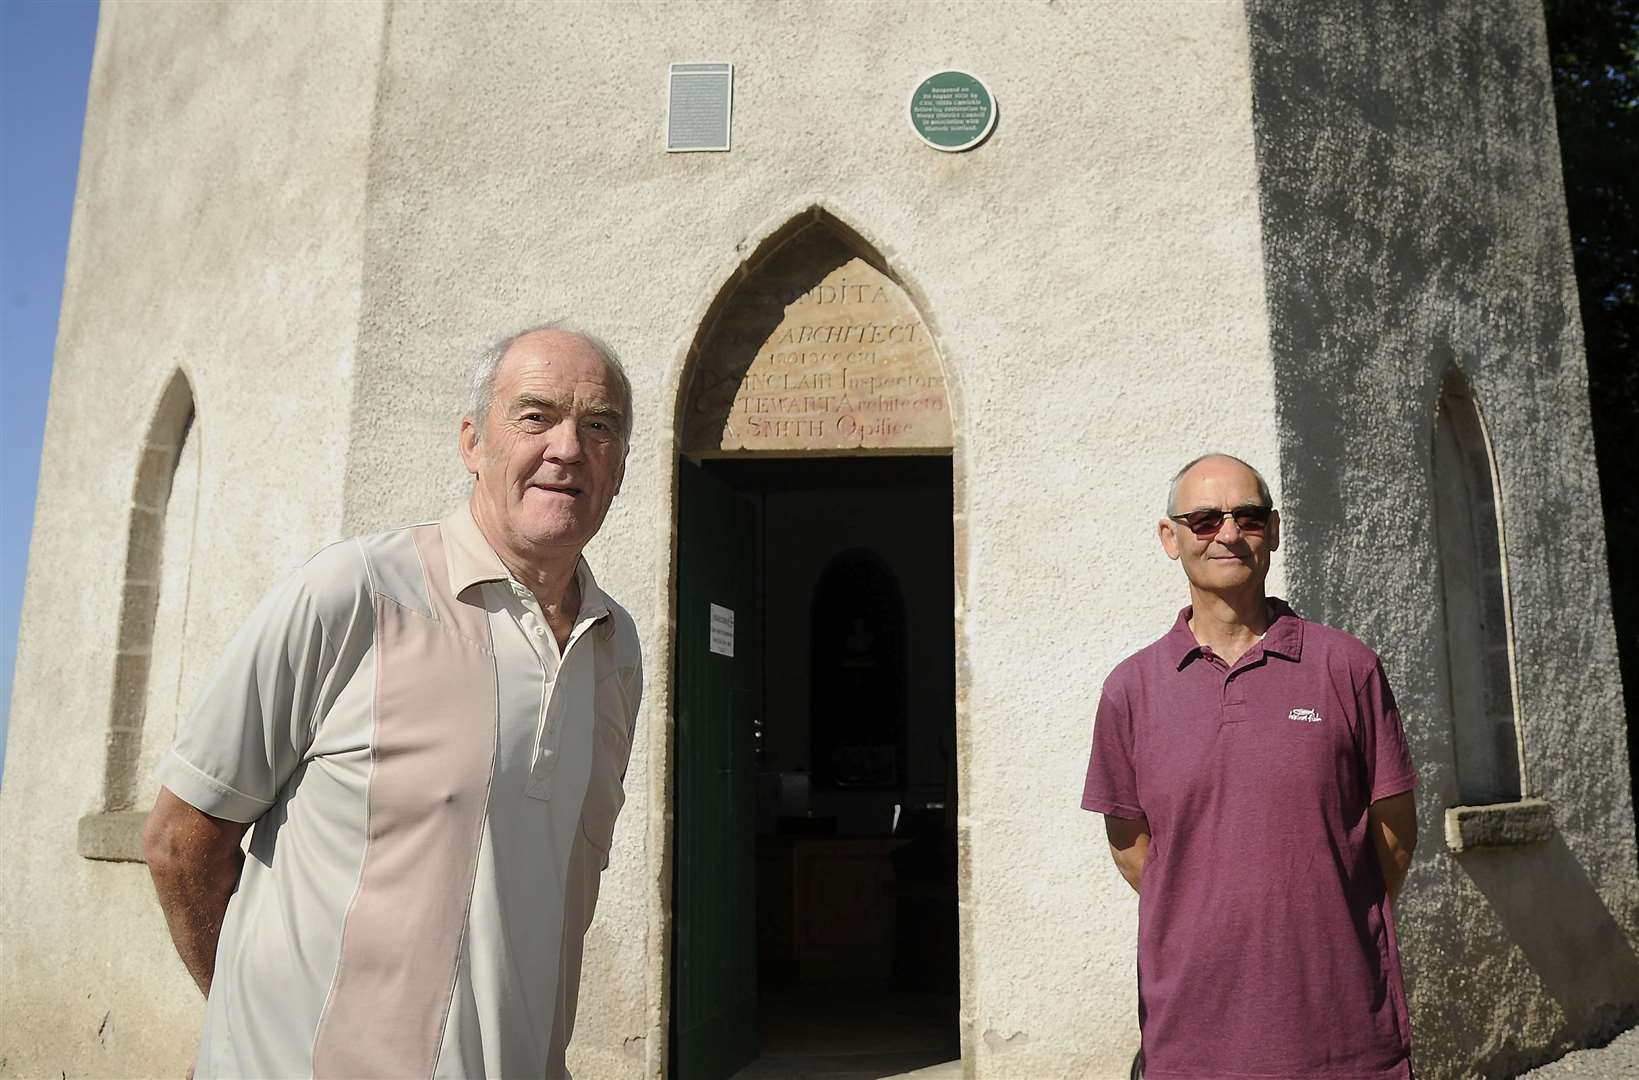 Forres Heritage Trust members Peter Haworth and George Alexander at the Nelson's Tower entrance.